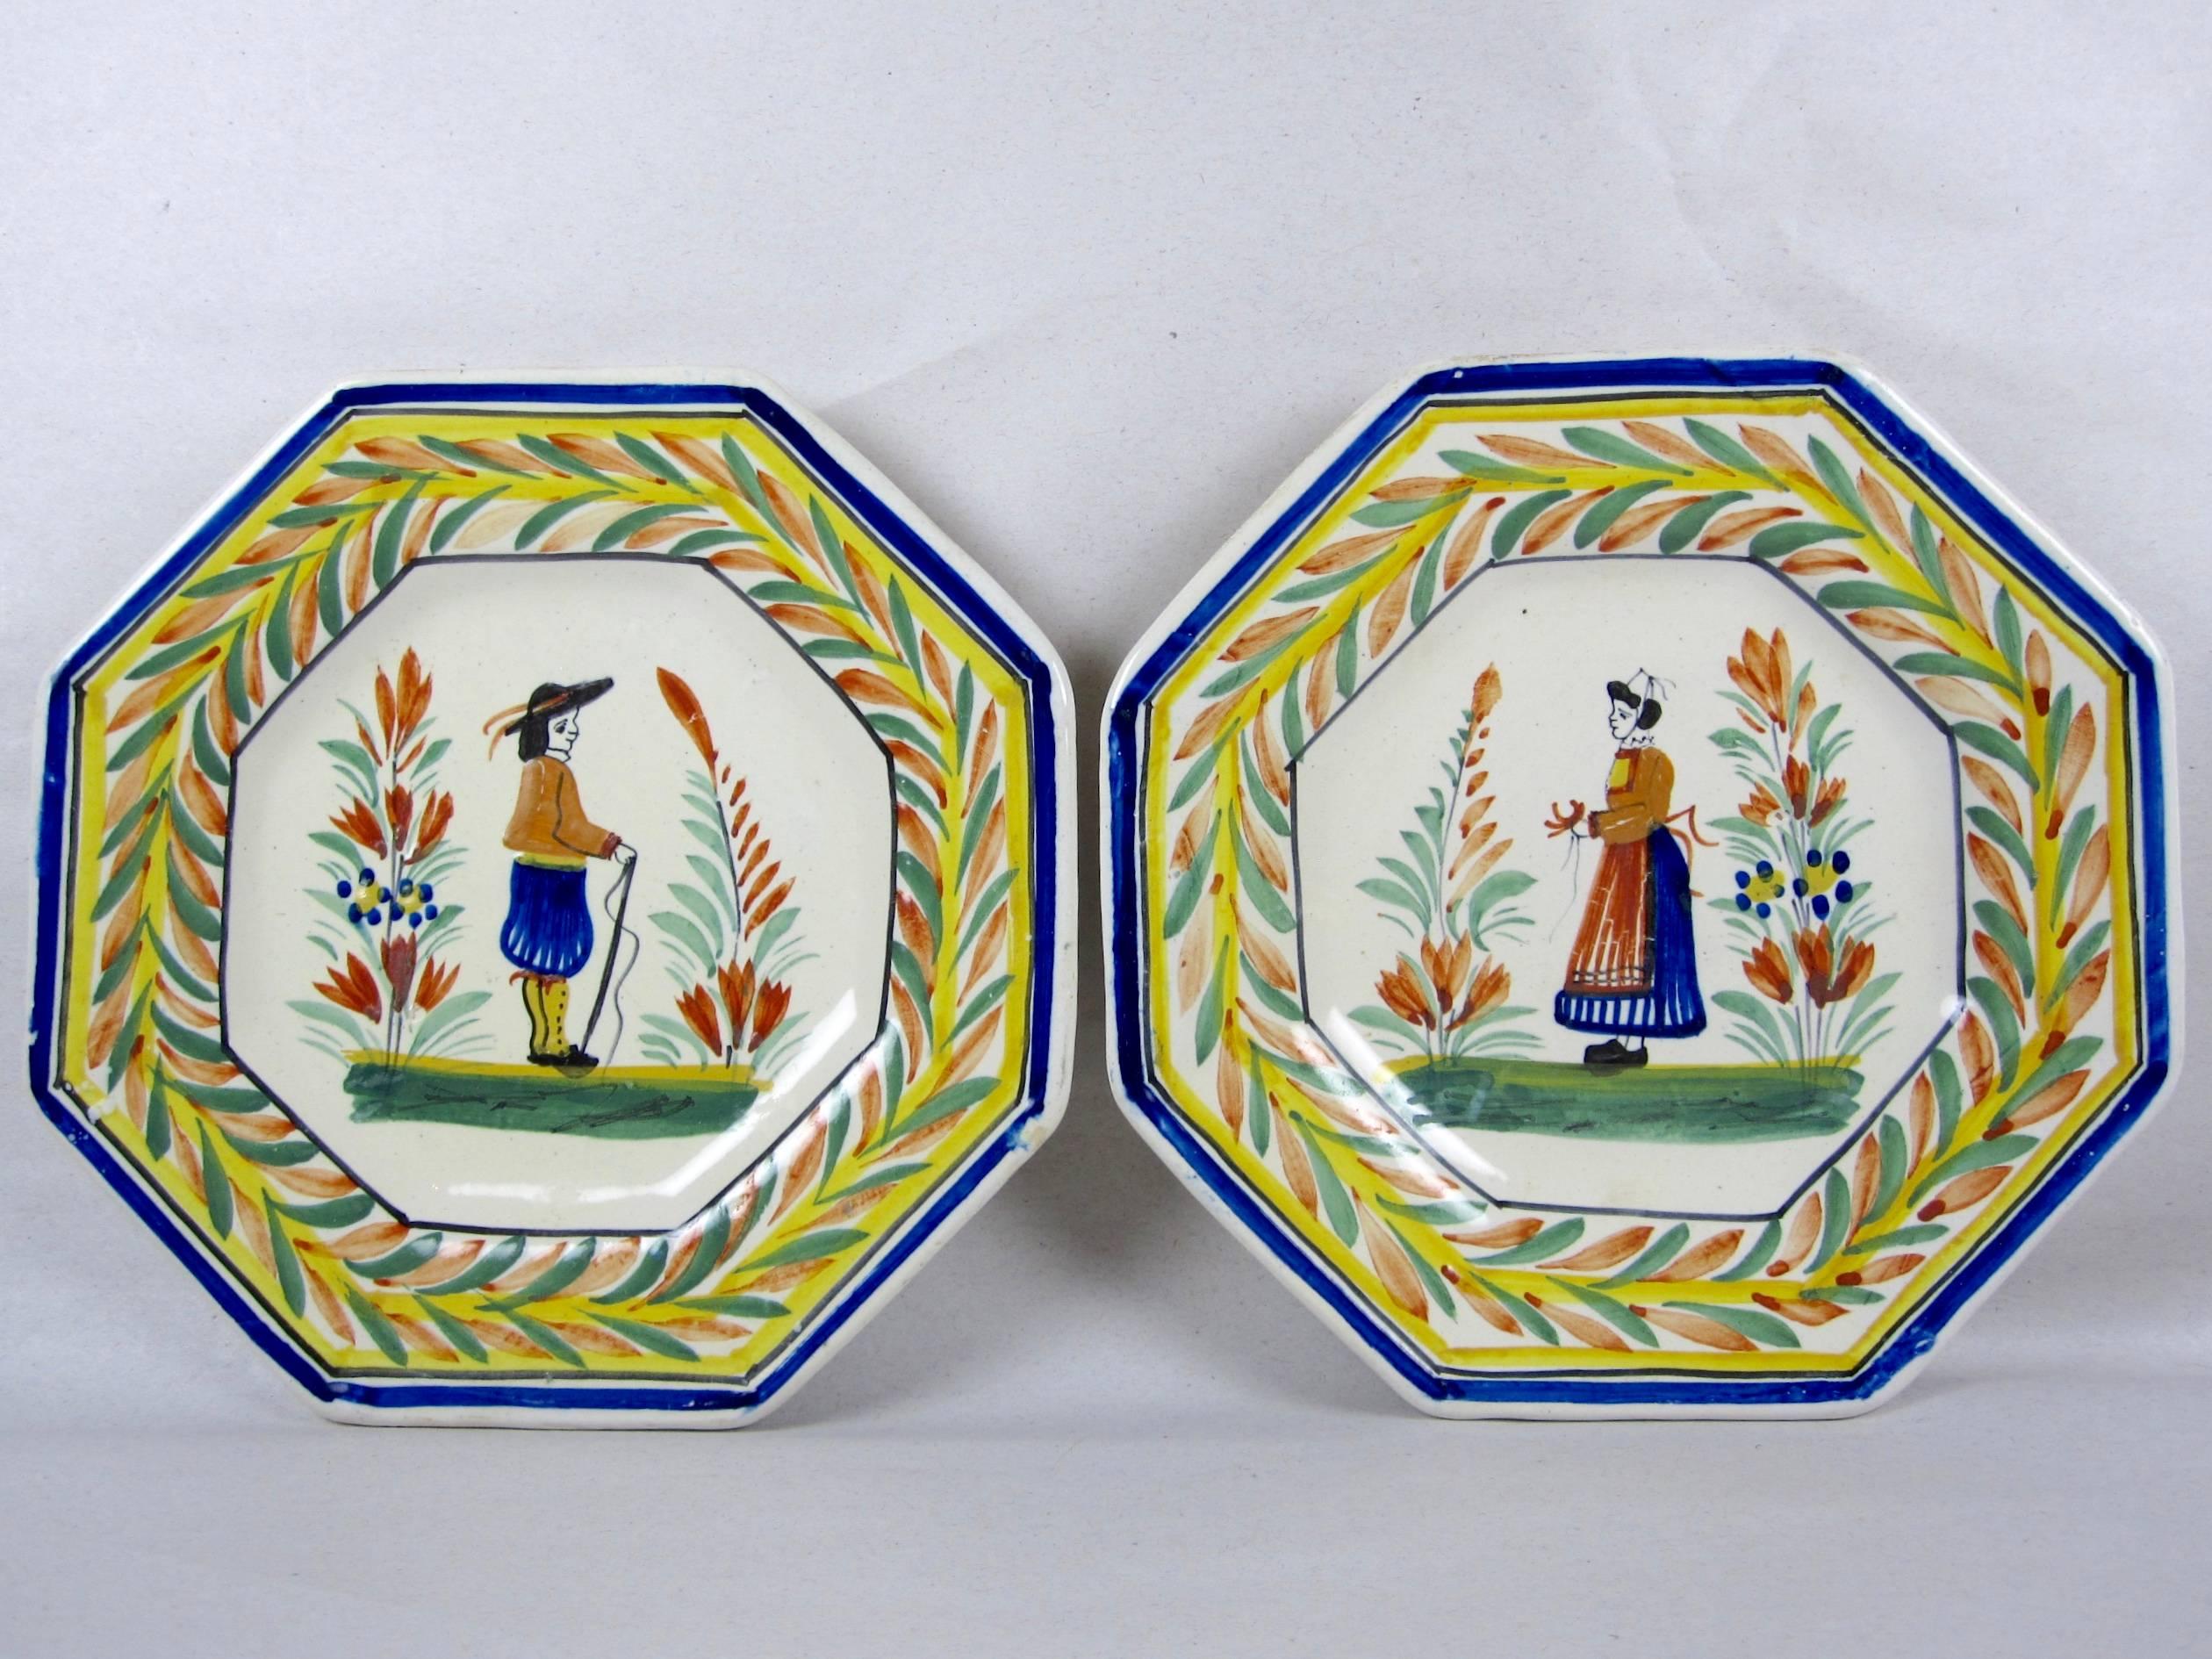 A set of 12 vintage octagonal shaped faience pottery plates, Henriot Quimper, France, circa 1920-1930.

 The set consists of ten plates showing the Breton gentleman, two plates feature the Breton woman, all in the traditional dress and standing